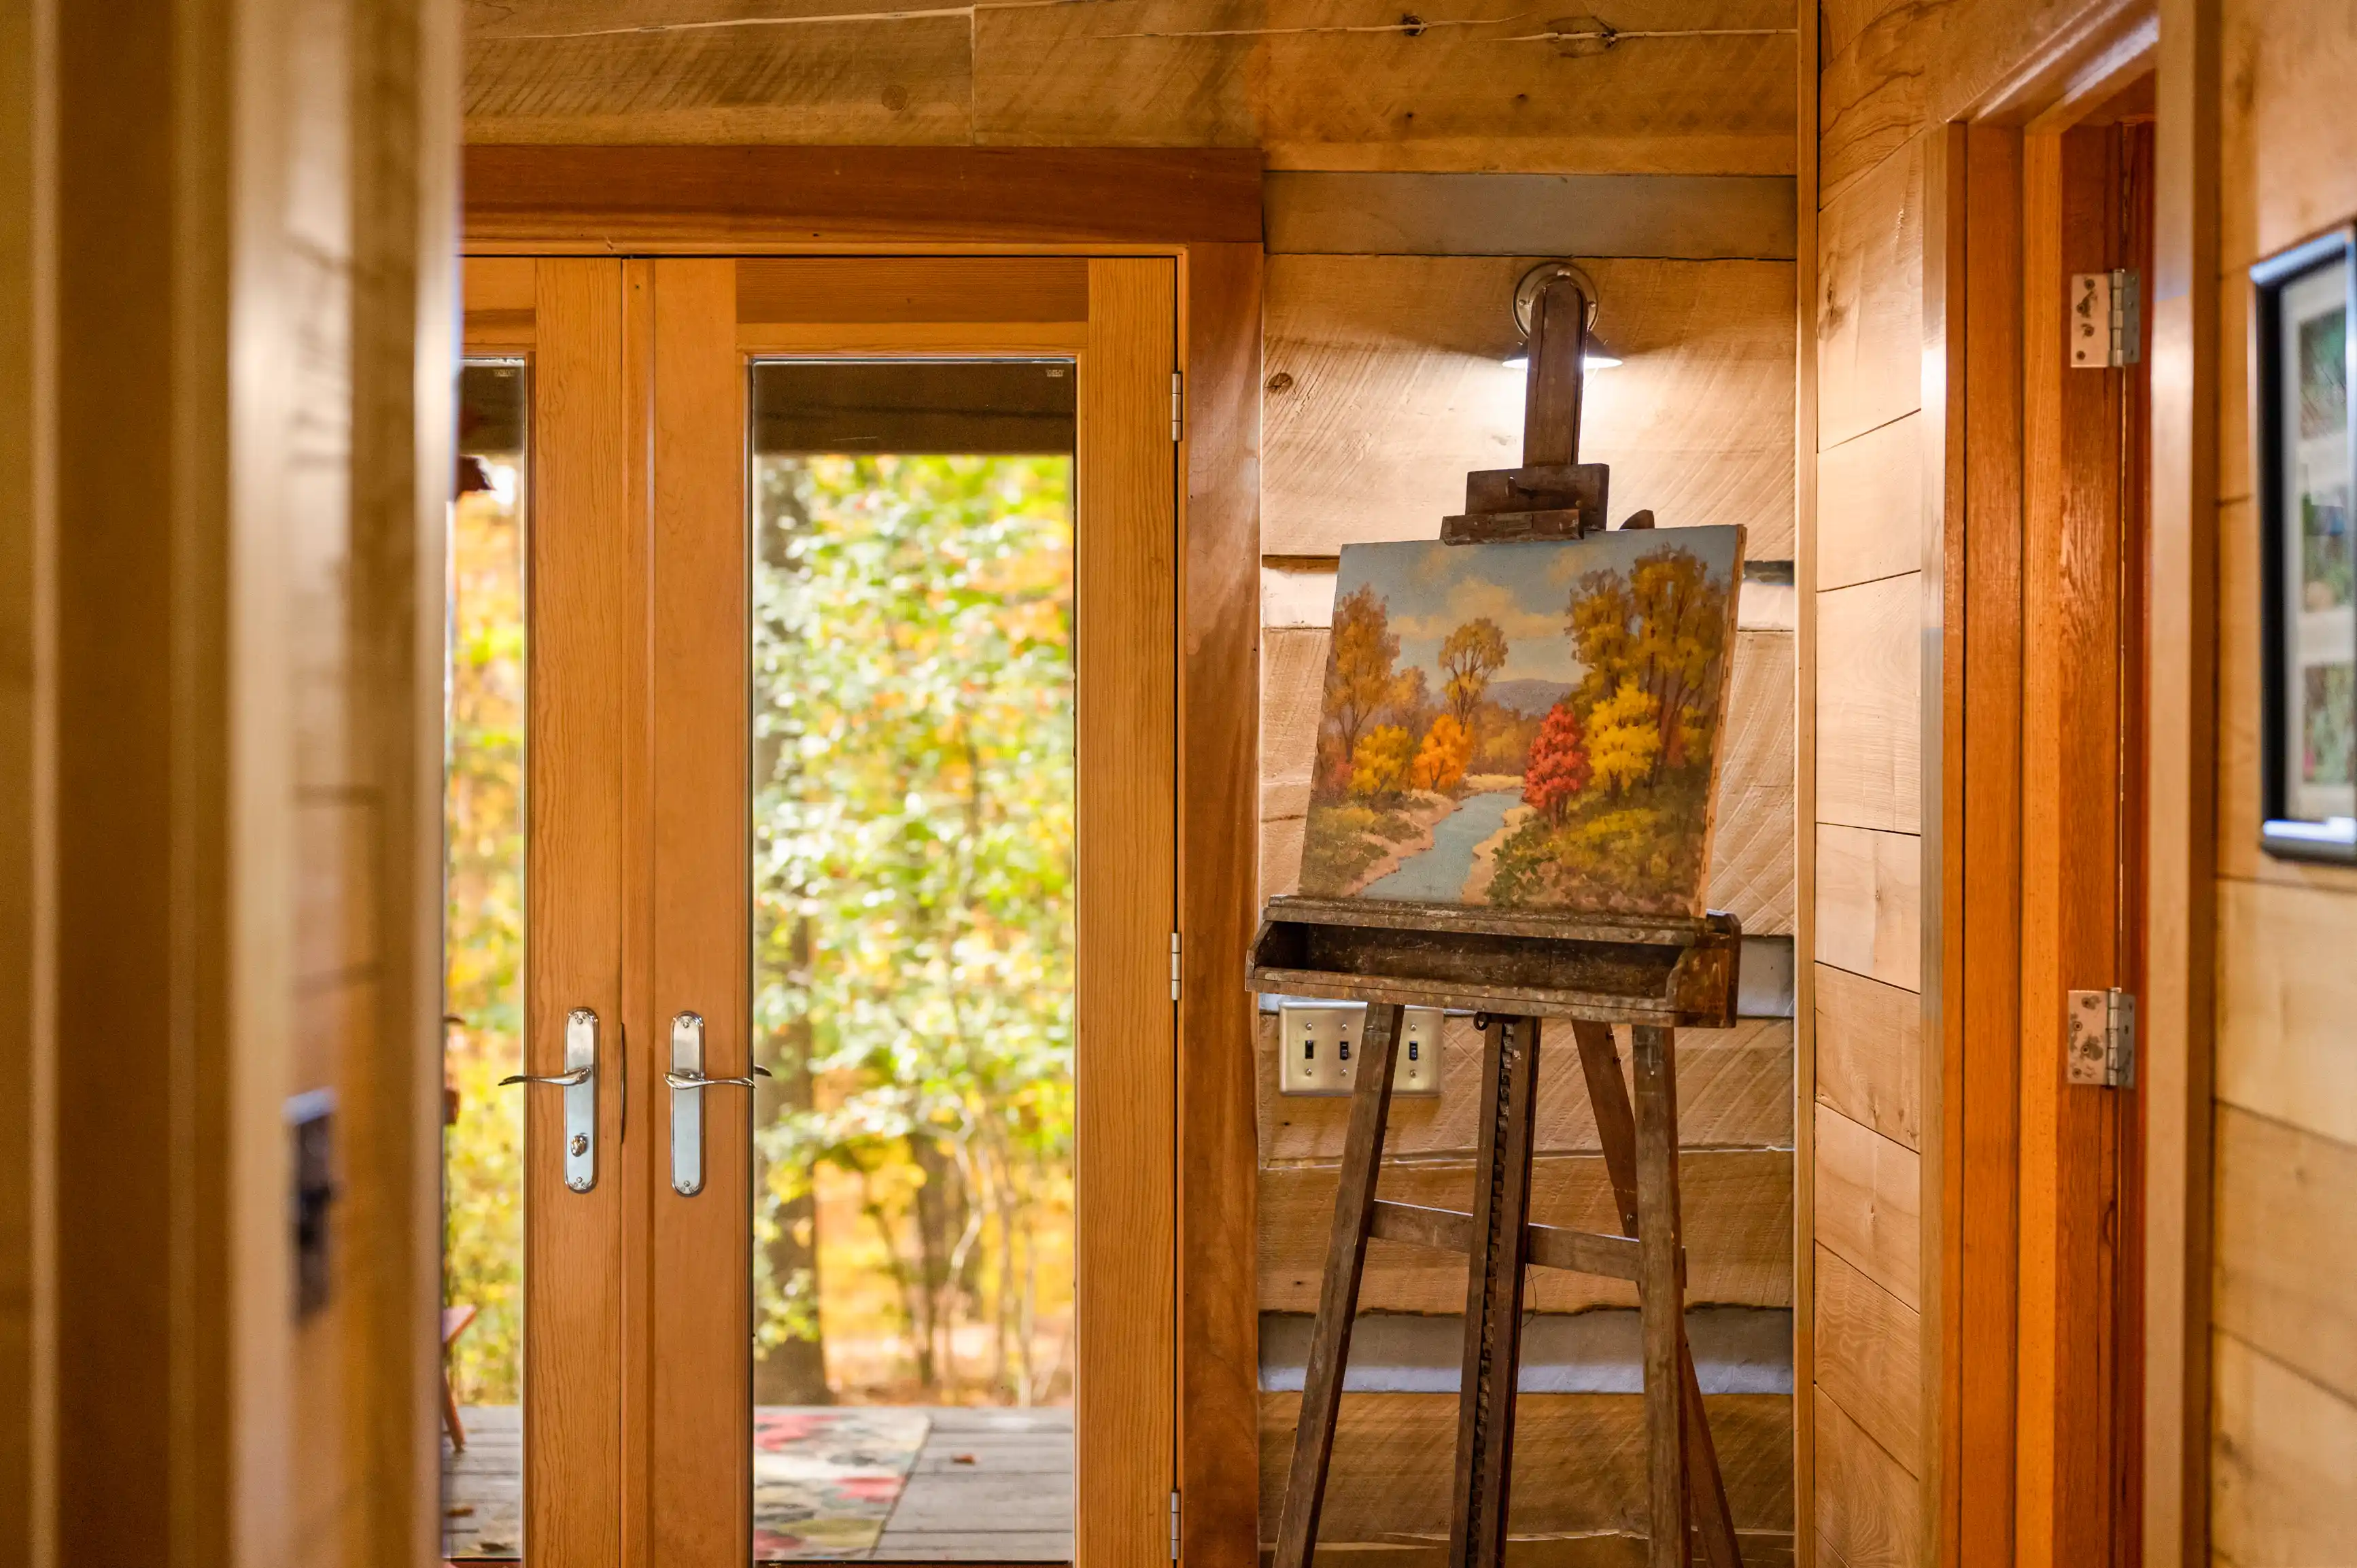 Alt text: An autumn landscape painting on an easel inside a cozy wooden room with an open door leading to the outdoors.